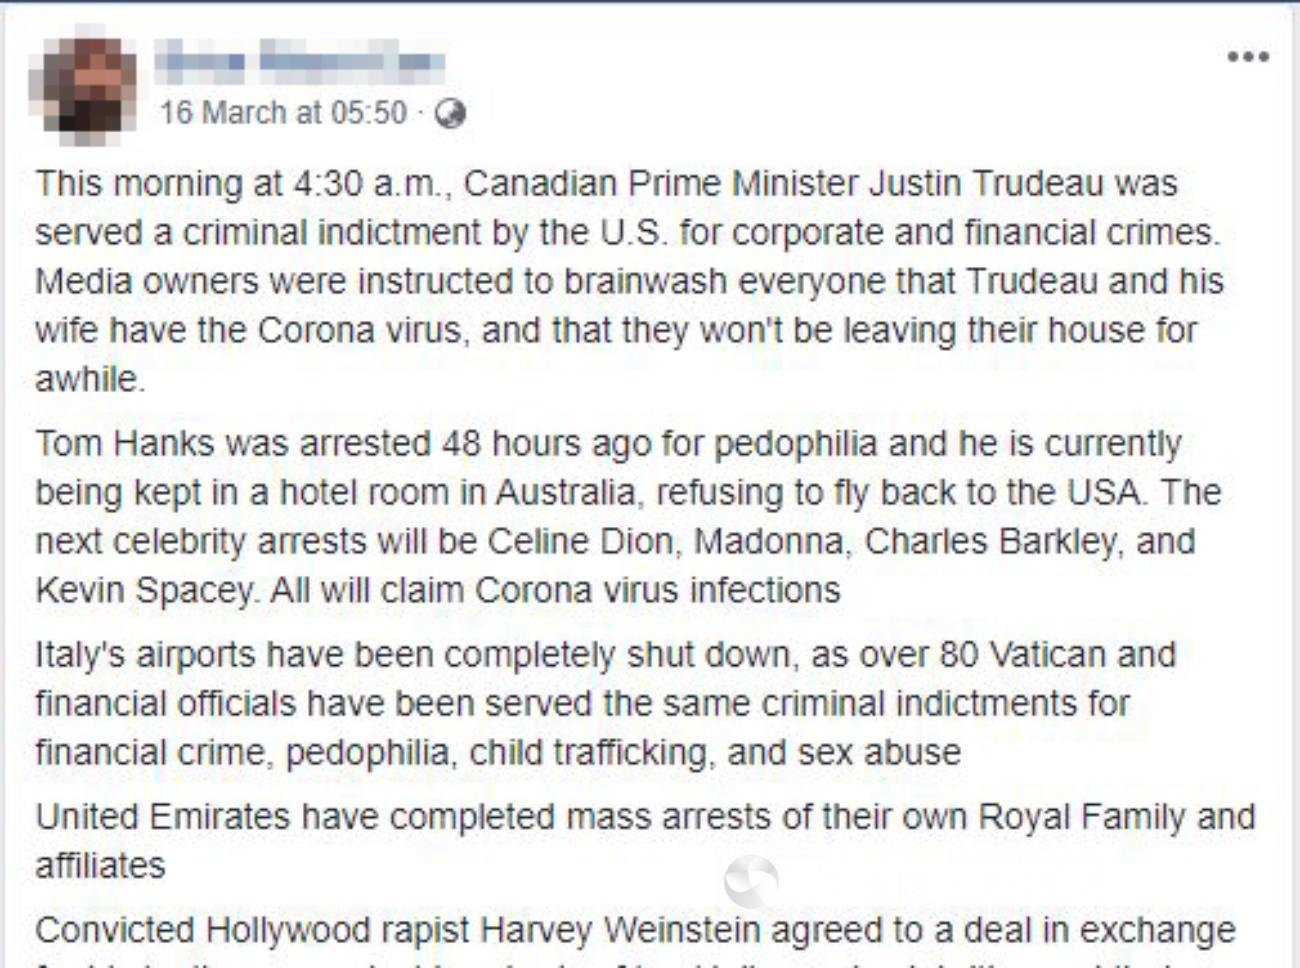 Facebook post making claims about Justin Trudeau and others.